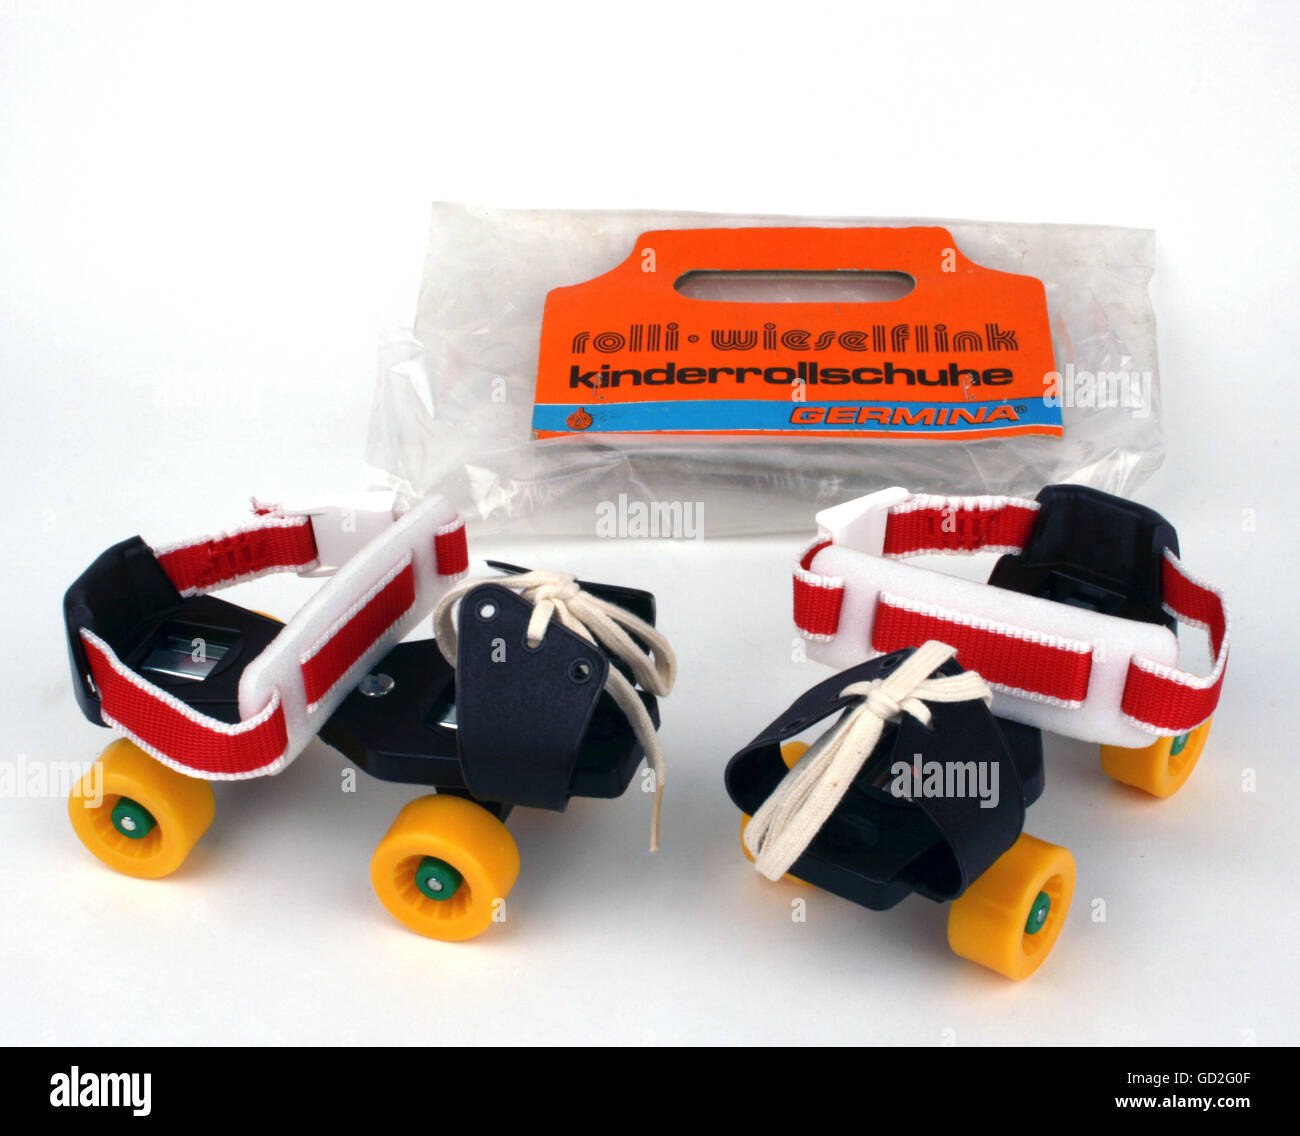 Sport / tempo libero, Rollerblade Germina Childrens 'Wieselflink', design: Design by factory, made by: VEB Kombinat Sportgeraete Schmalkalden, used Fambach, East-Germany, 1980, Additional-Rights-clearences-not available Foto Stock